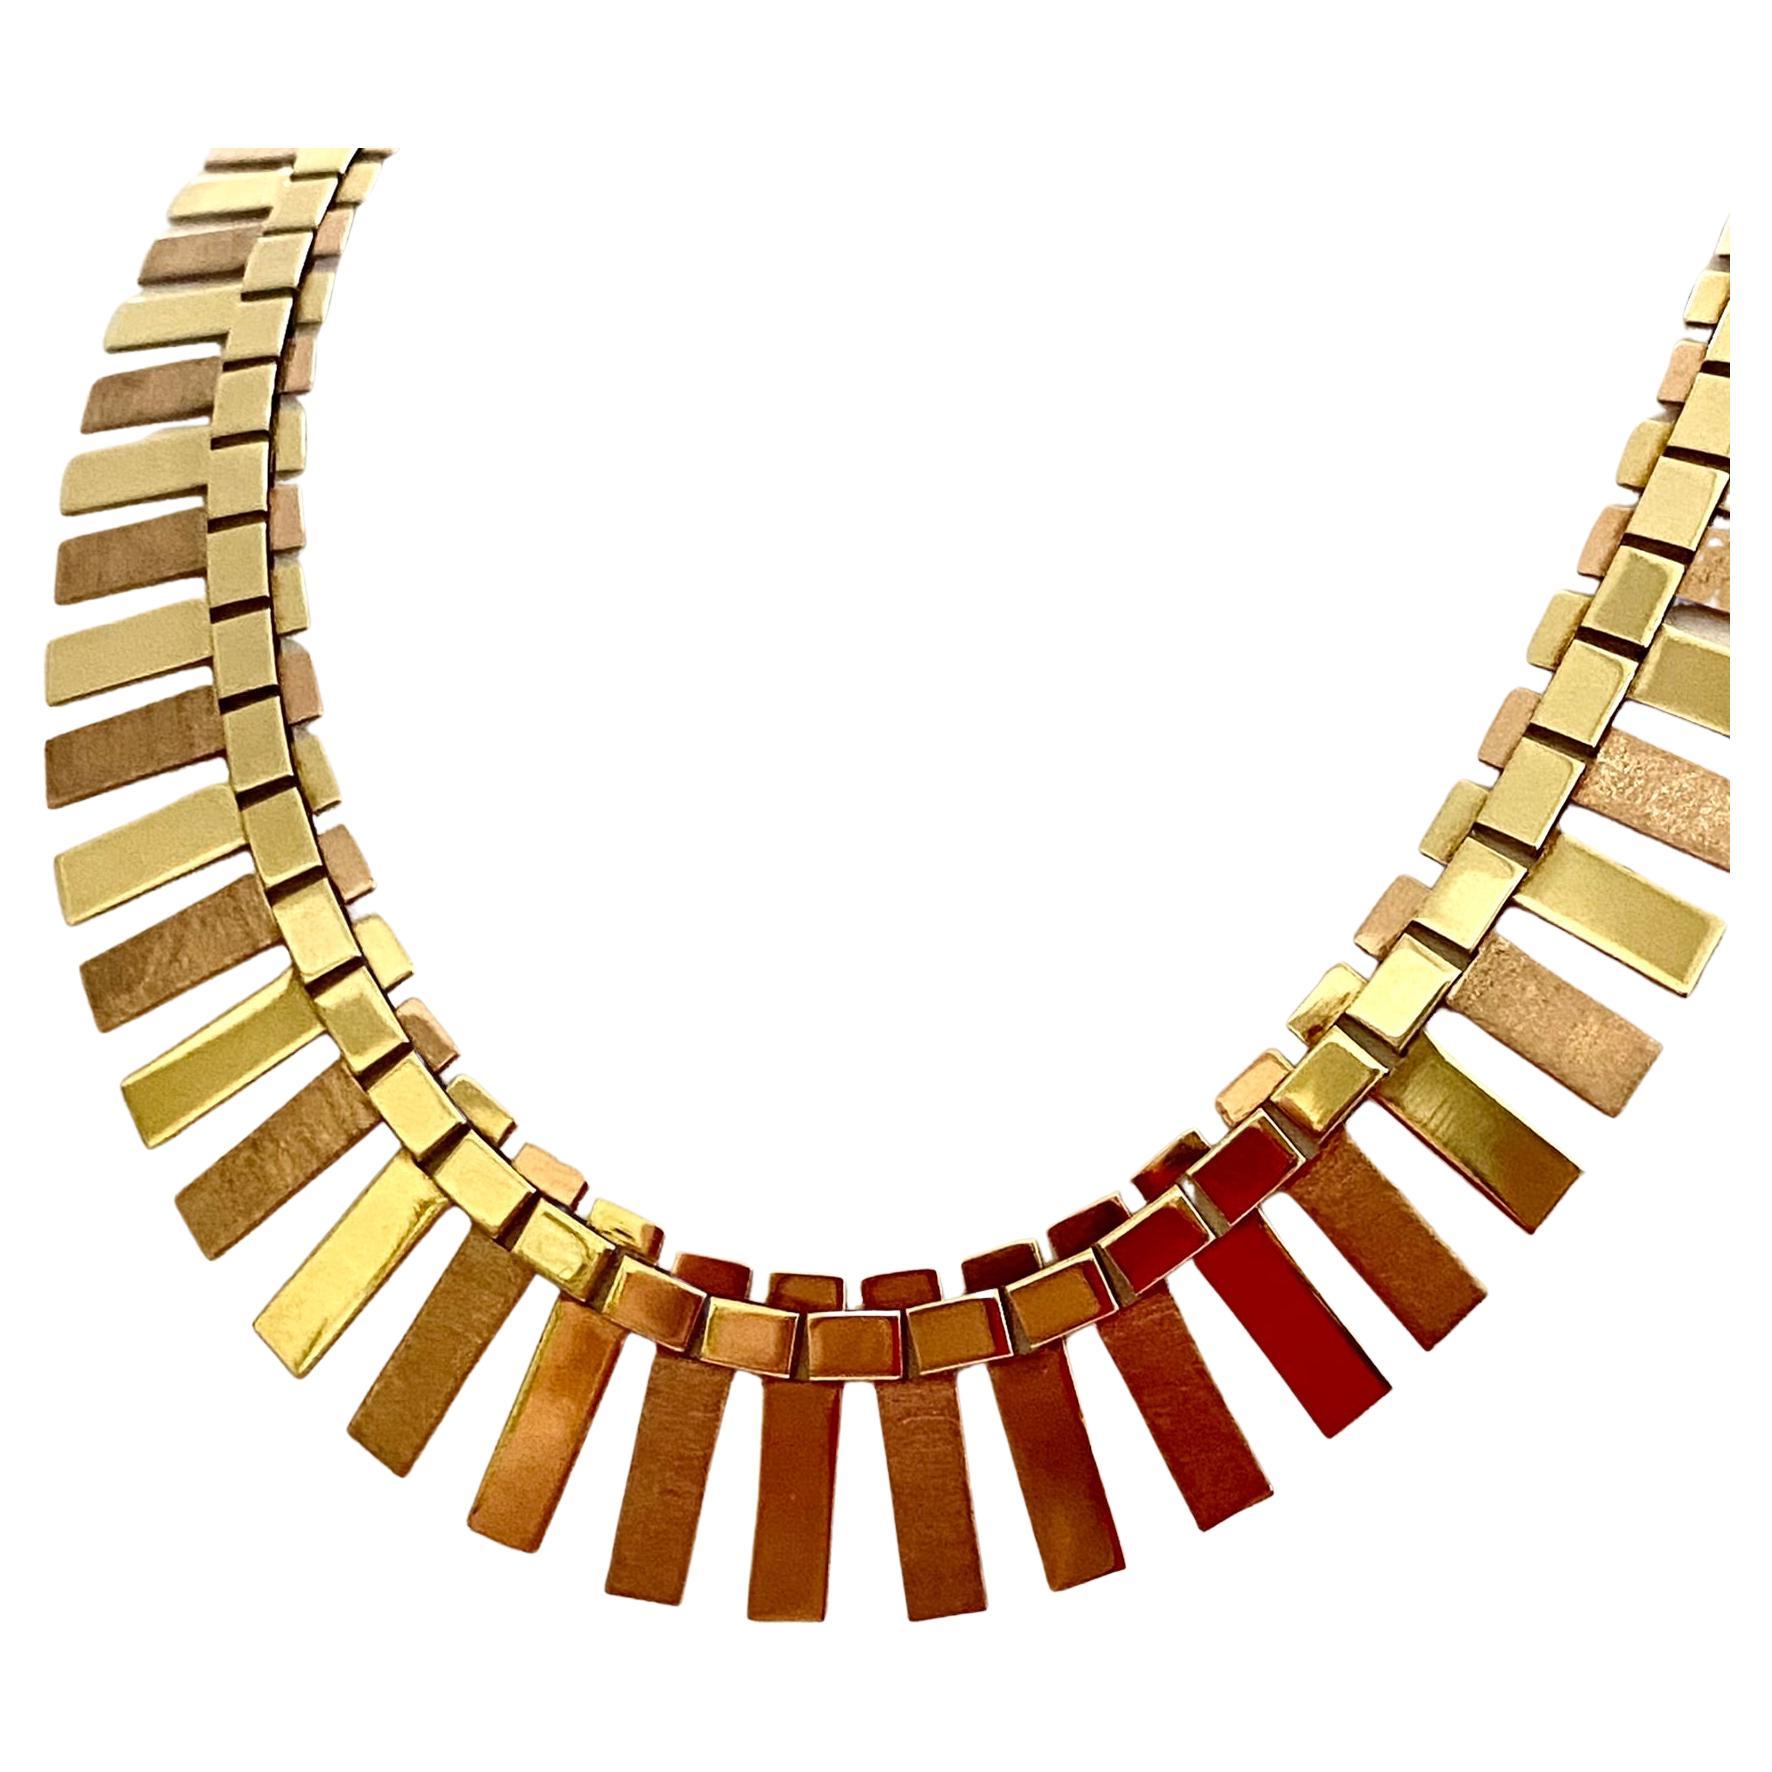 14k. (585/-) Yellow/Red Gold Bar Necklace, Vintage Germany Ca 1965